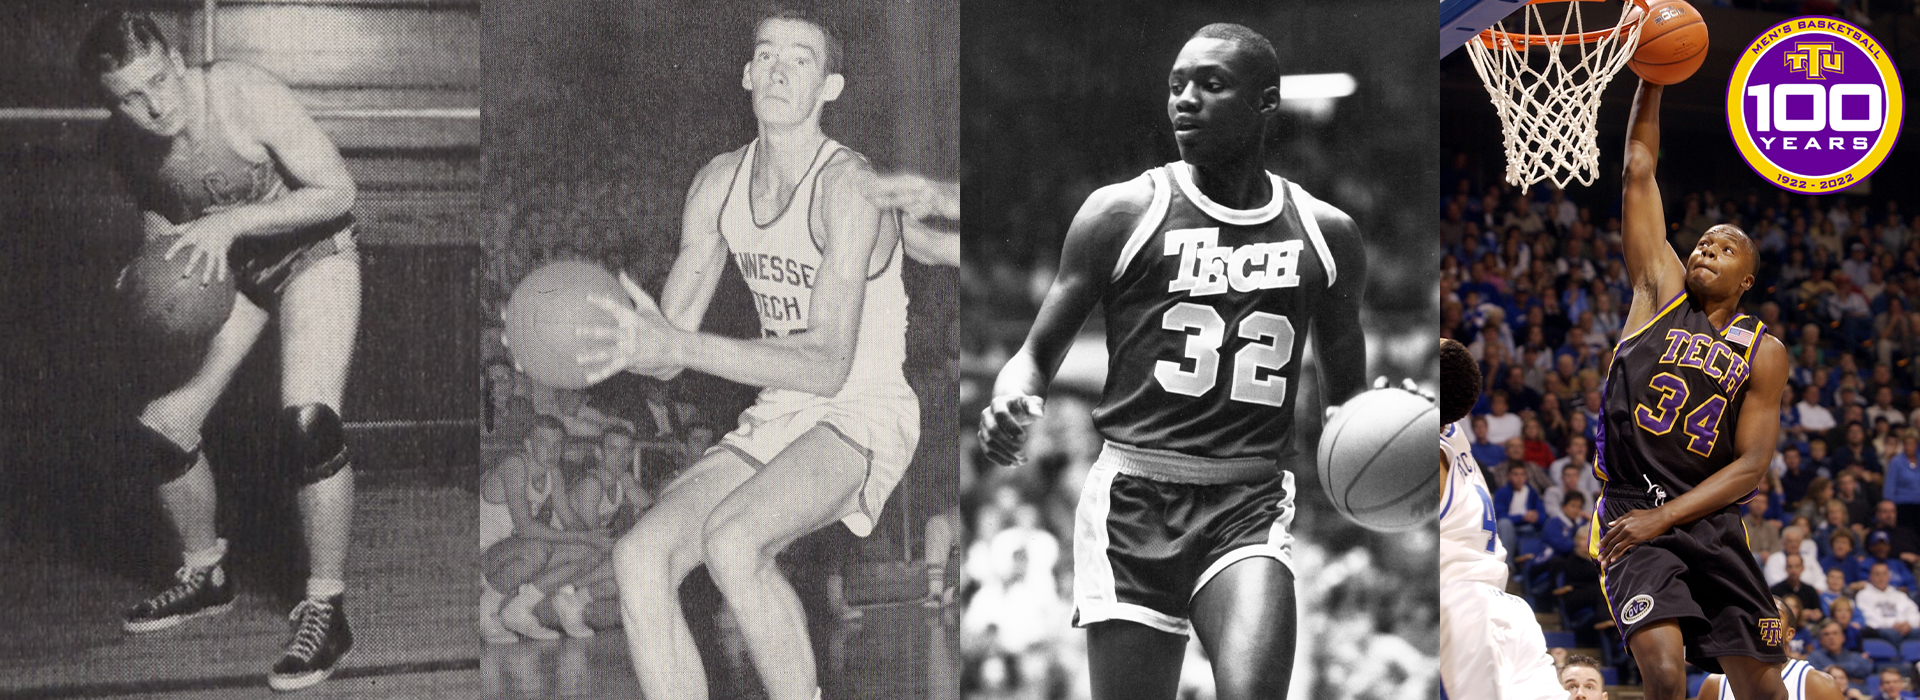 Tech men's basketball names All-Century Team as part of 100th Anniversary celebration